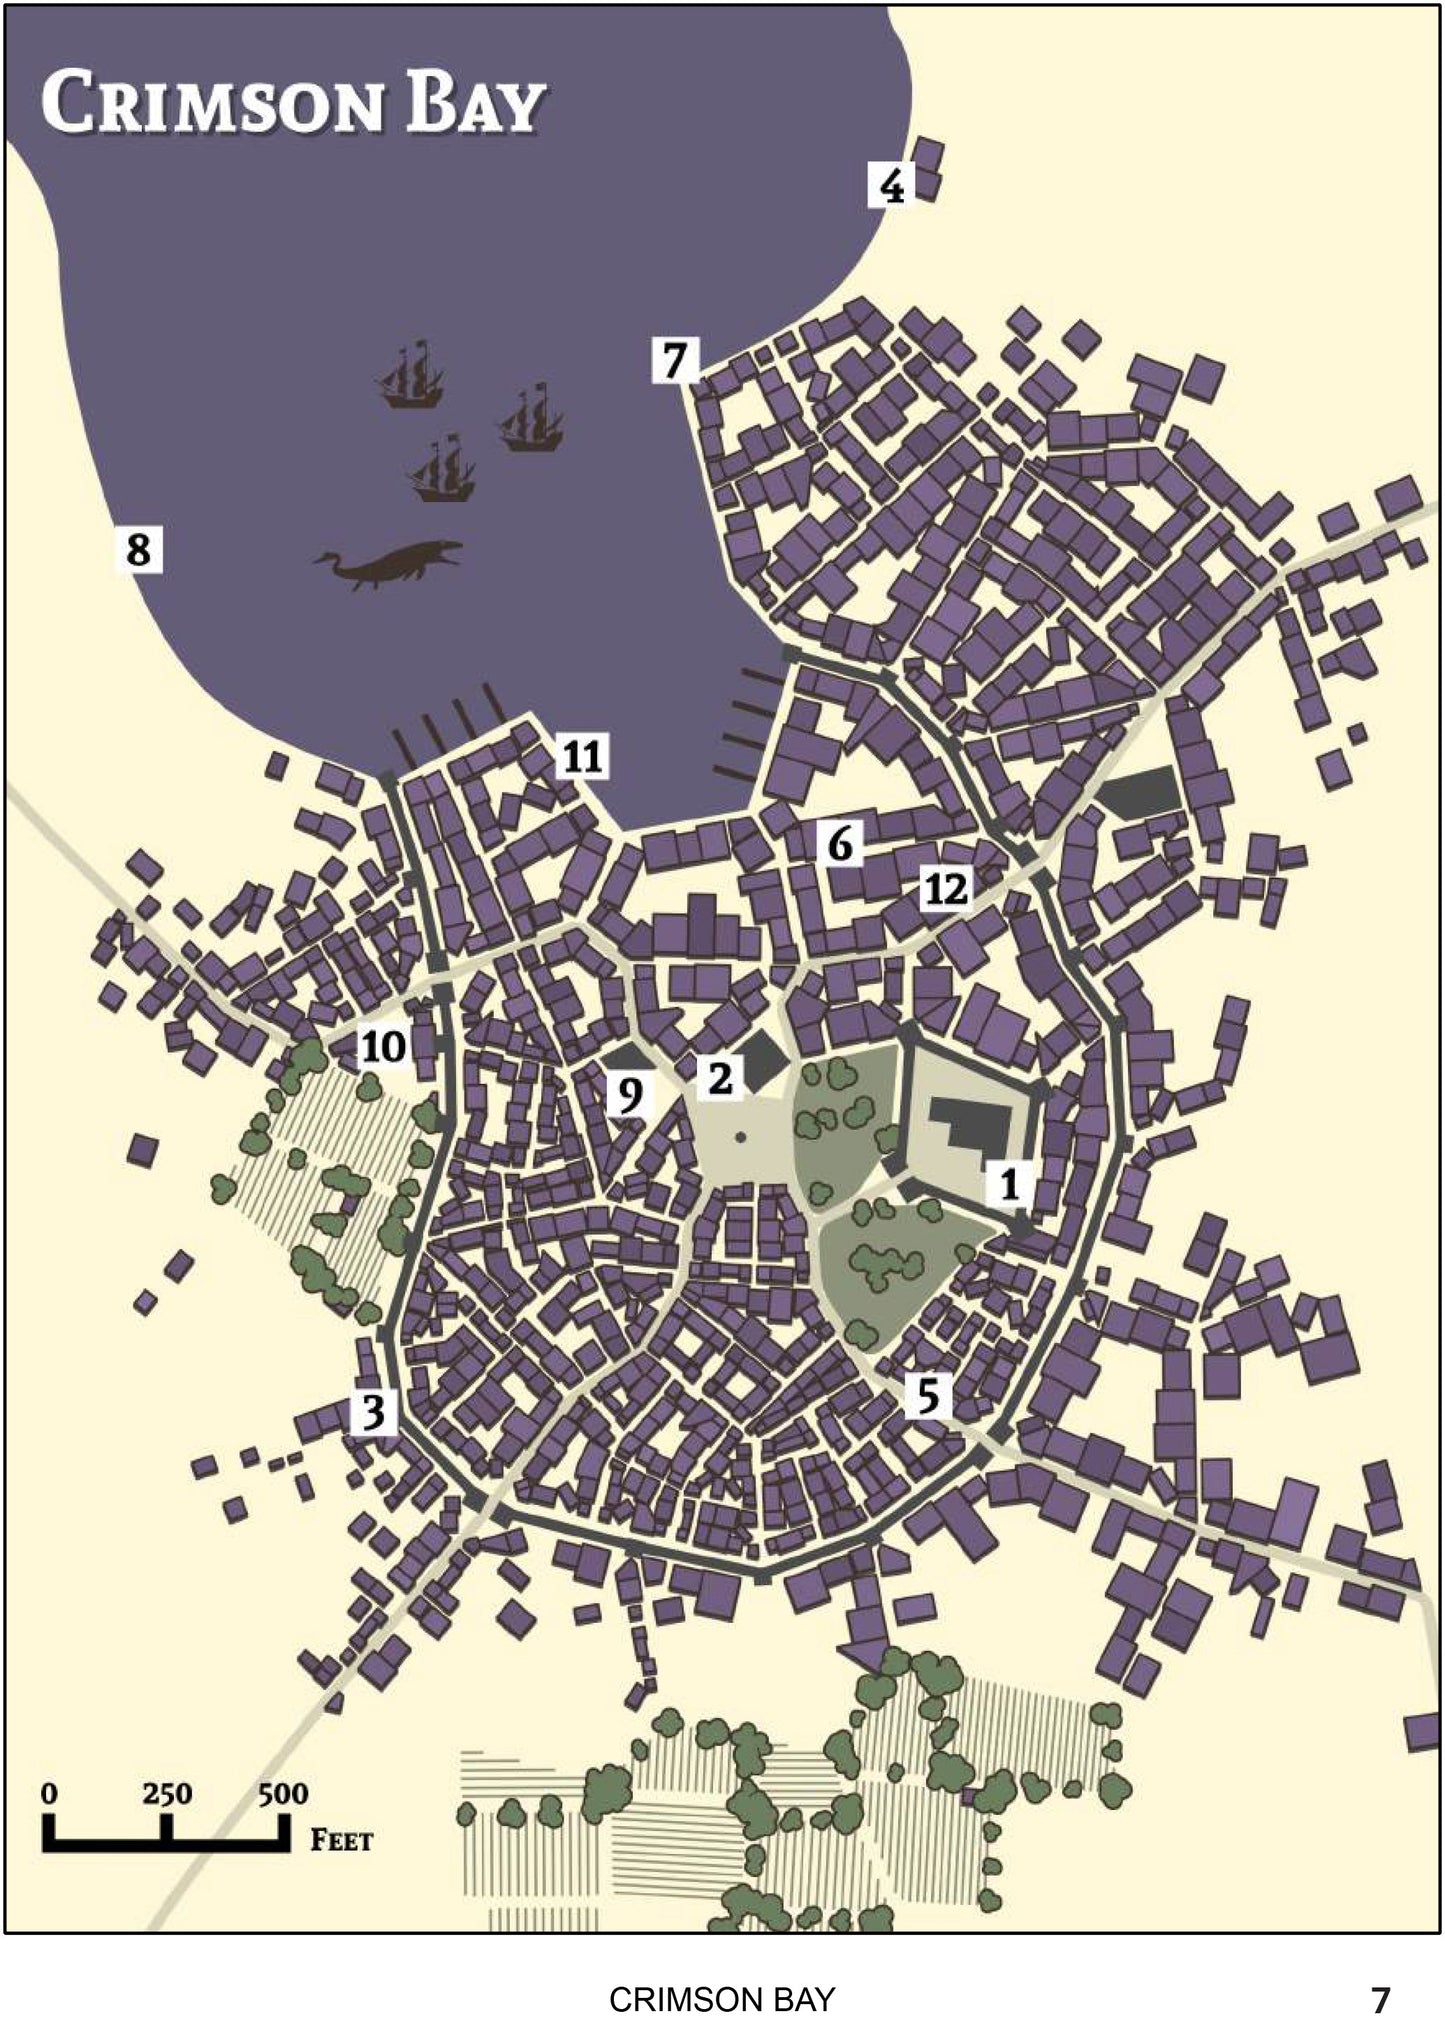 Just Passing Through: 12 Mid-Sized Towns for Any Fantasy RPG (PDF Only)